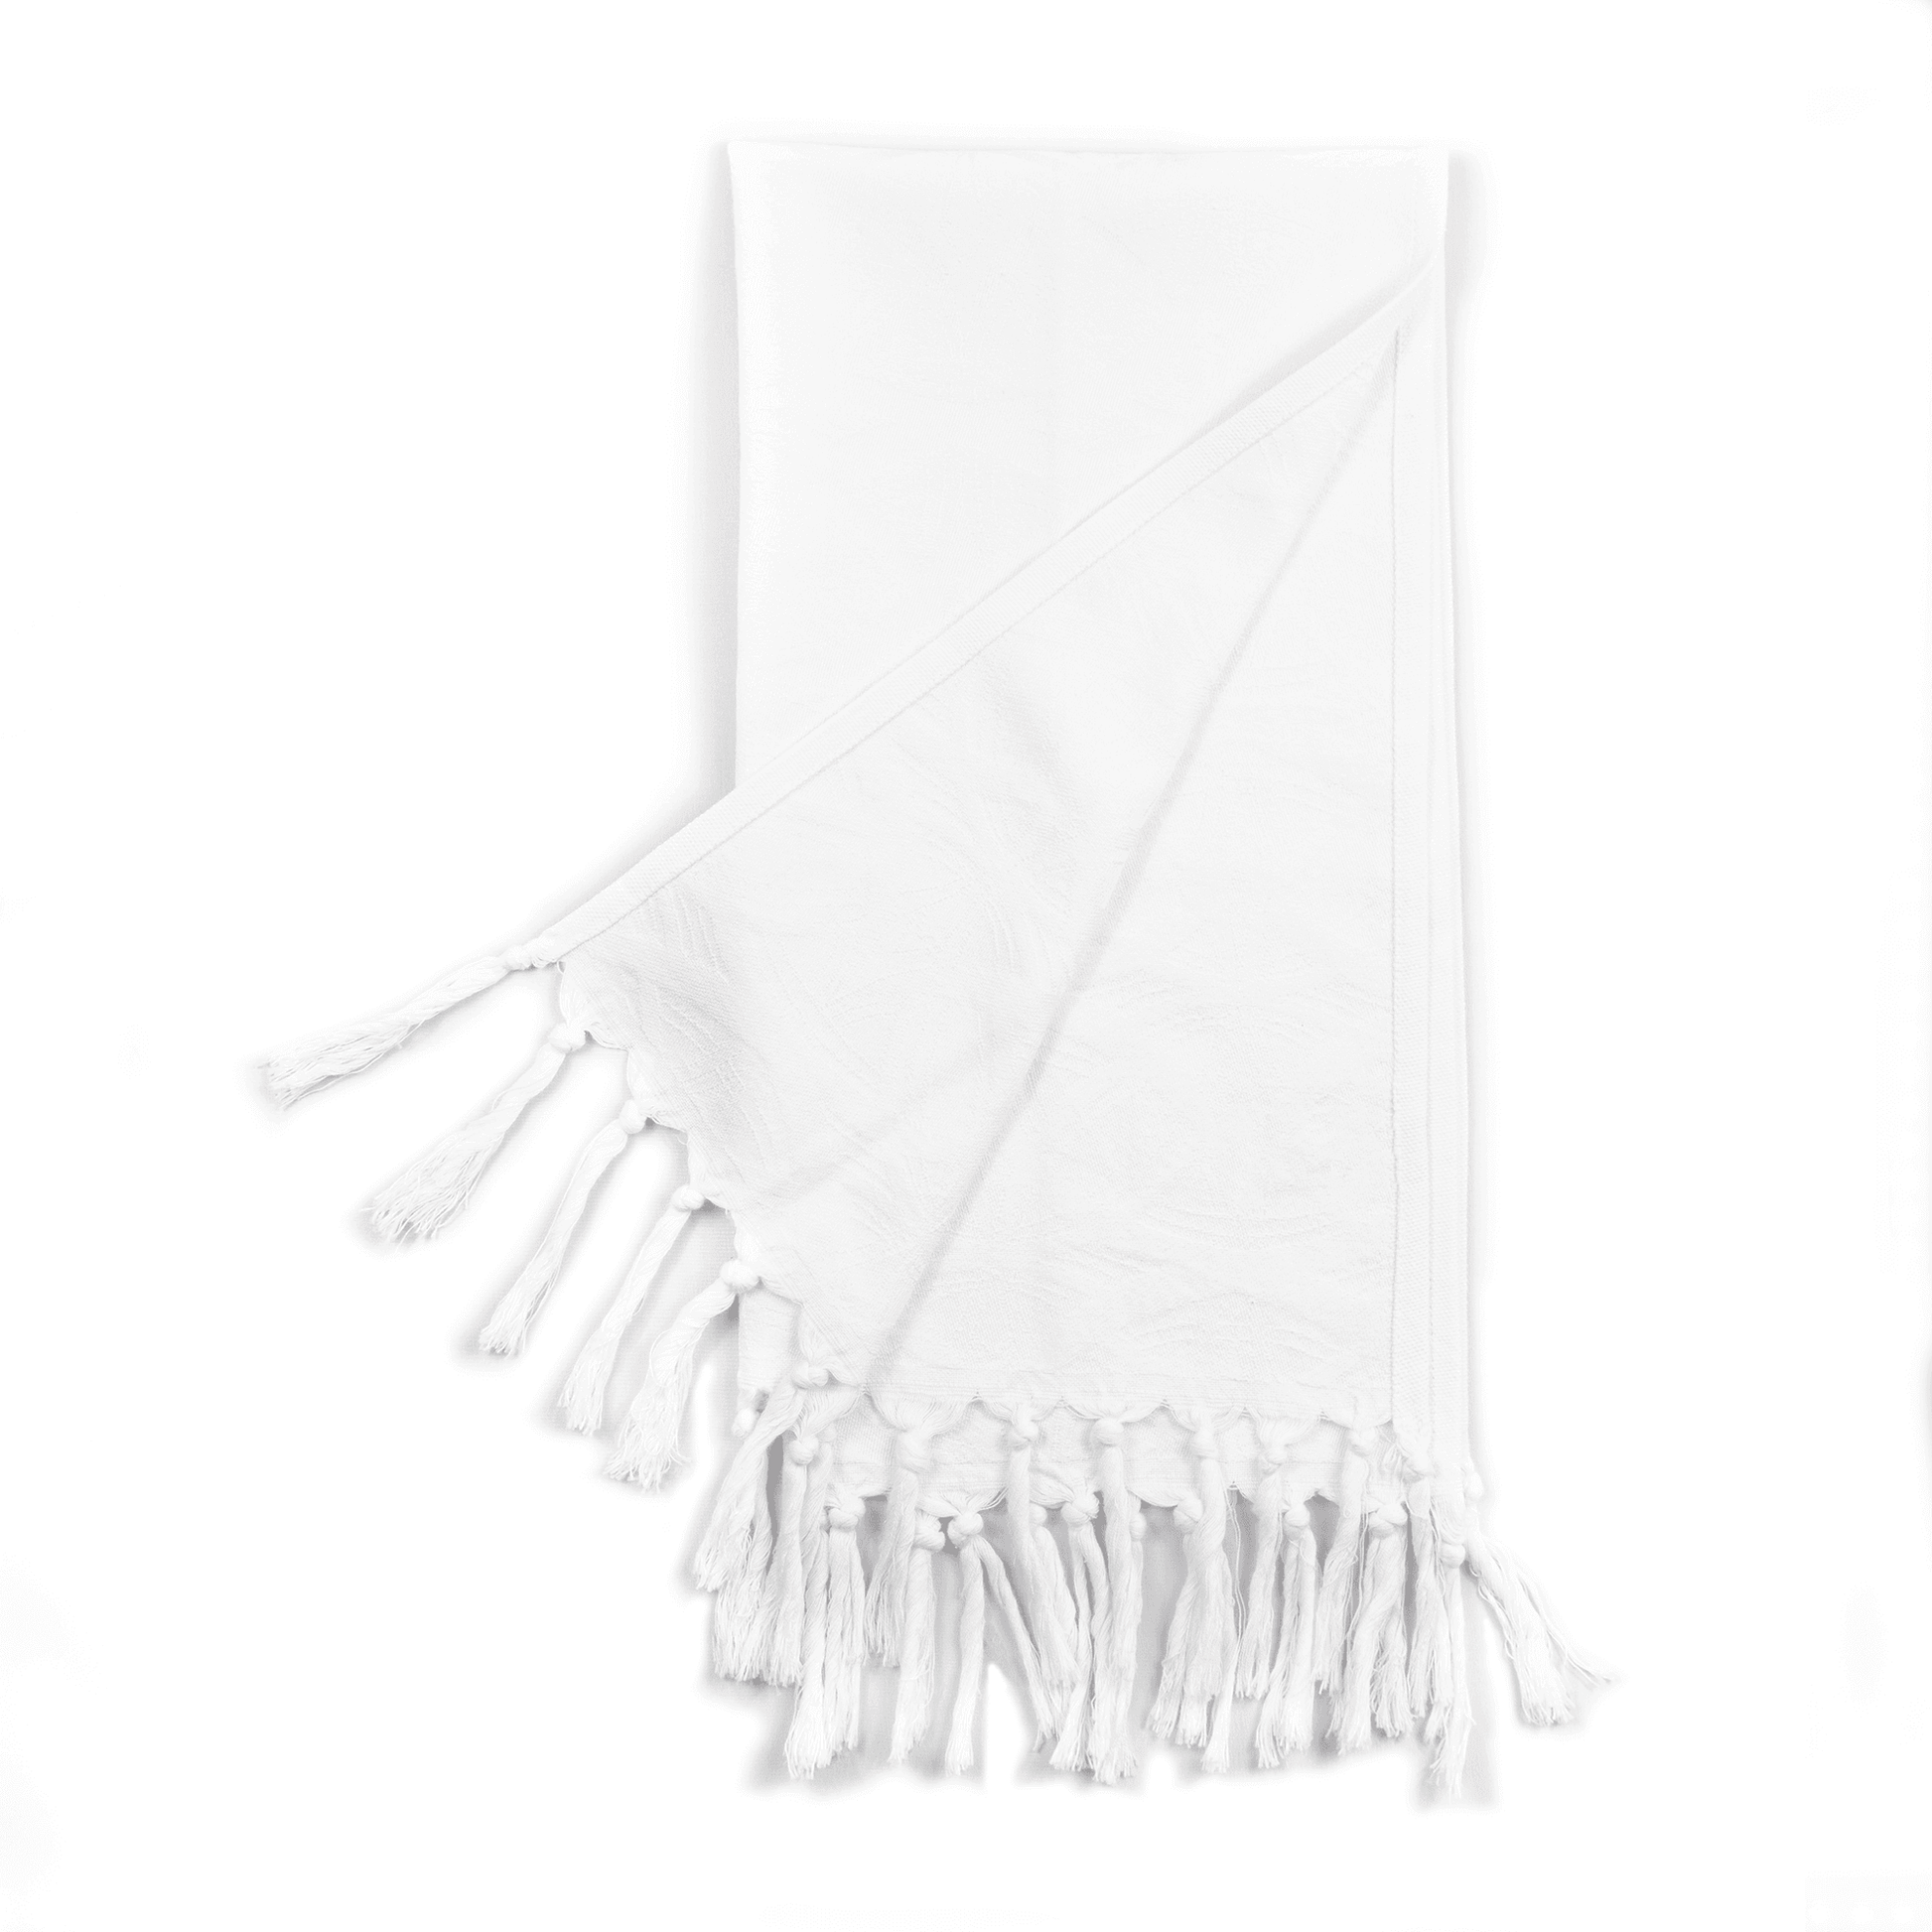 White Turkish towel from a Canadian business